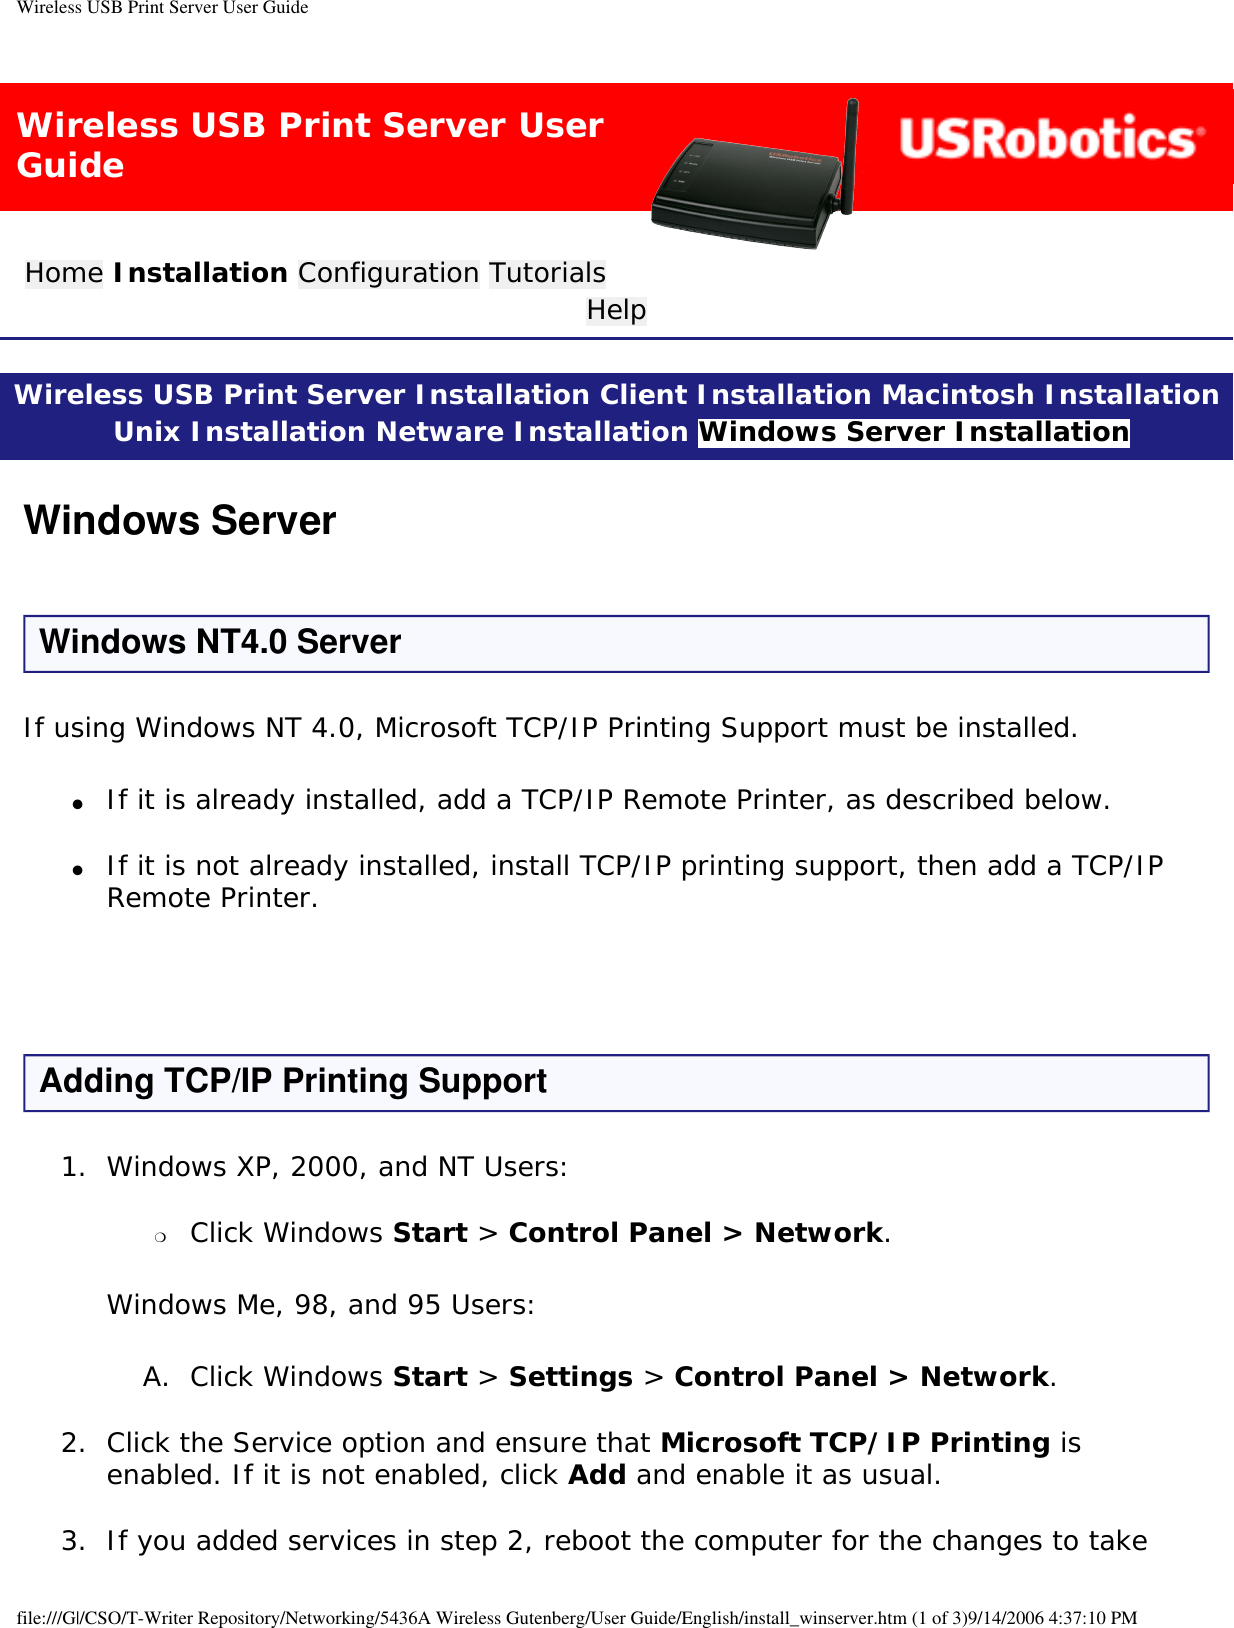 Wireless USB Print Server User GuideWireless USB Print Server User GuideHome Installation Configuration Tutorials Help Wireless USB Print Server Installation Client Installation Macintosh Installation Unix Installation Netware Installation Windows Server Installation Windows ServerWindows NT4.0 ServerIf using Windows NT 4.0, Microsoft TCP/IP Printing Support must be installed. ●     If it is already installed, add a TCP/IP Remote Printer, as described below. ●     If it is not already installed, install TCP/IP printing support, then add a TCP/IP Remote Printer.  Adding TCP/IP Printing Support1.  Windows XP, 2000, and NT Users: ❍     Click Windows Start &gt; Control Panel &gt; Network. Windows Me, 98, and 95 Users:A.  Click Windows Start &gt; Settings &gt; Control Panel &gt; Network. 2.  Click the Service option and ensure that Microsoft TCP/IP Printing is enabled. If it is not enabled, click Add and enable it as usual. 3.  If you added services in step 2, reboot the computer for the changes to take file:///G|/CSO/T-Writer Repository/Networking/5436A Wireless Gutenberg/User Guide/English/install_winserver.htm (1 of 3)9/14/2006 4:37:10 PM